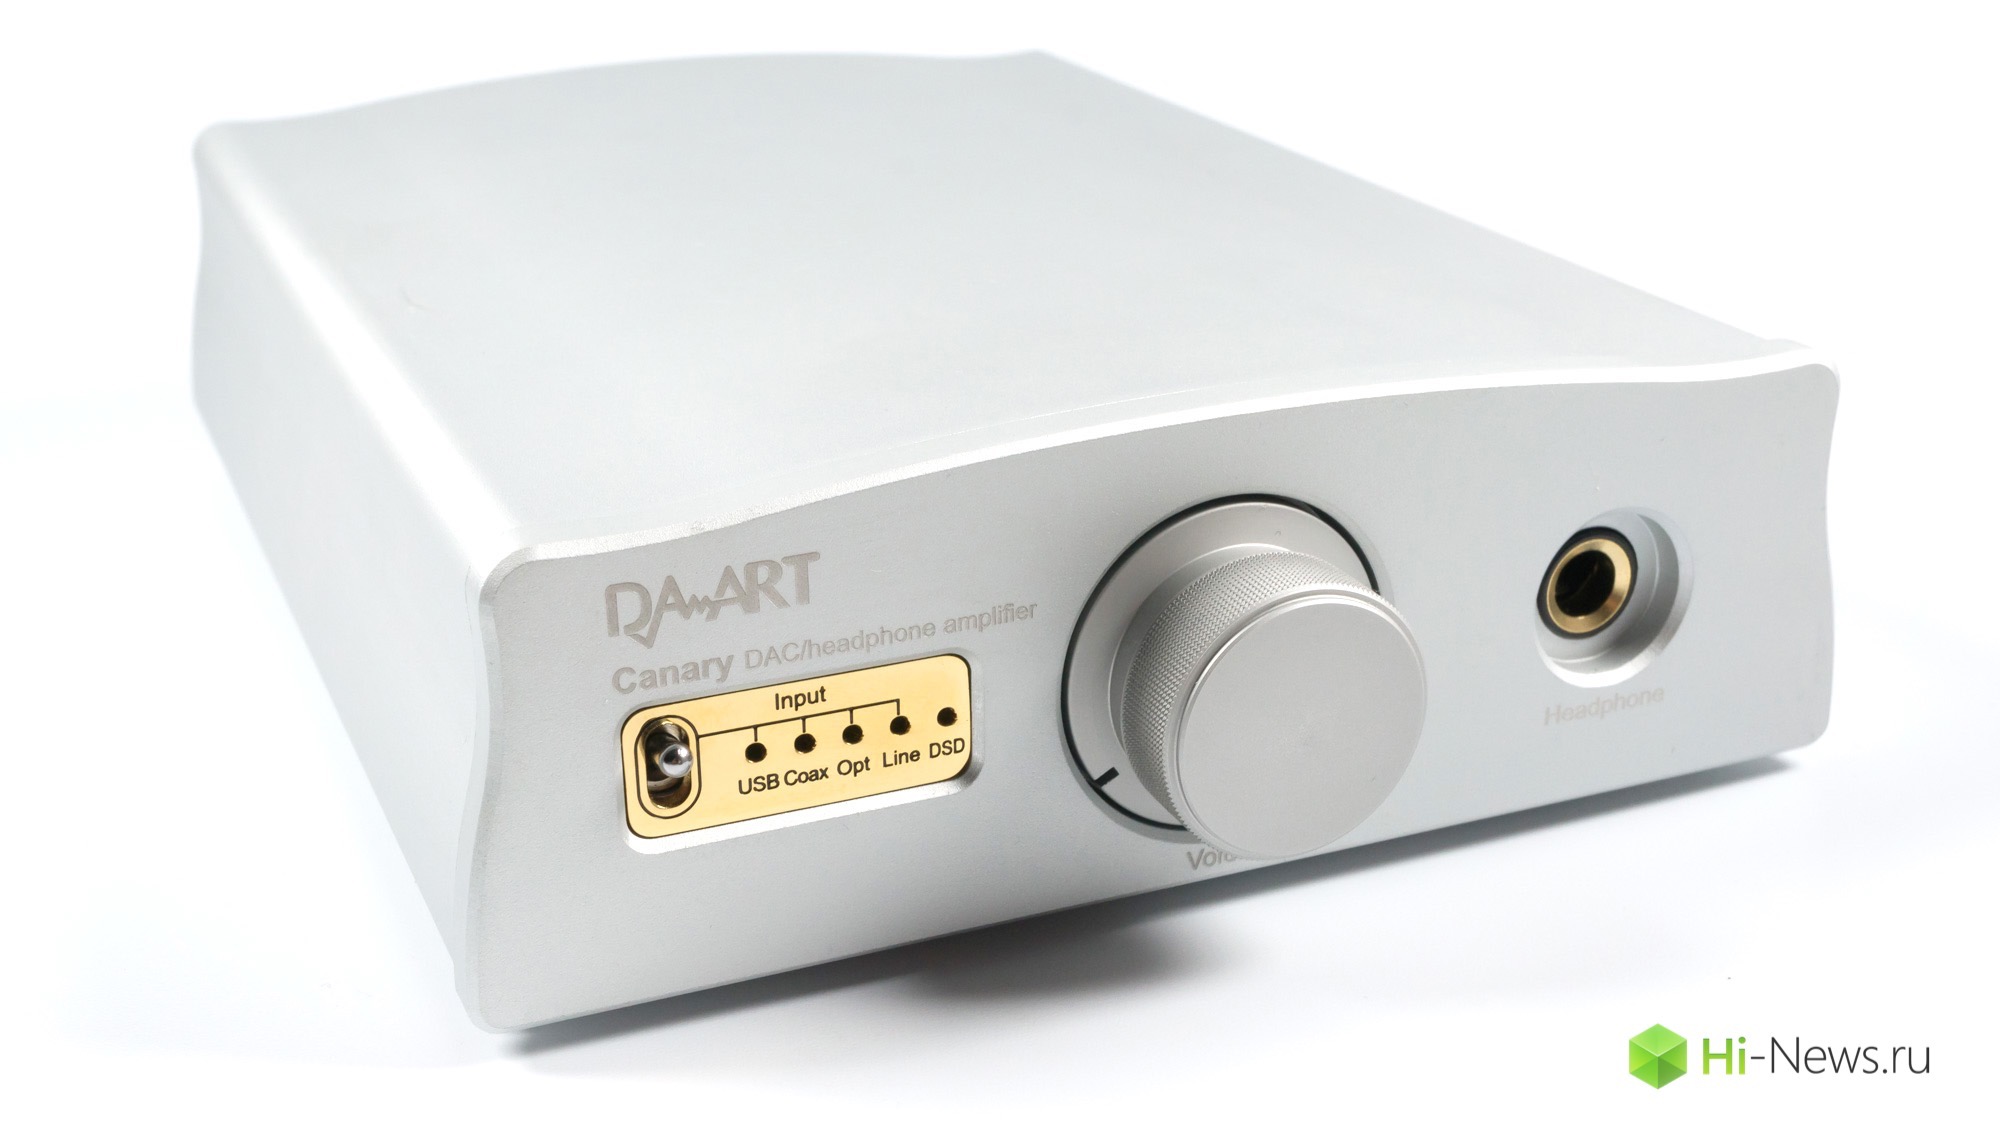 Review DAC with headphone amplifier Daart Canary from Yulong